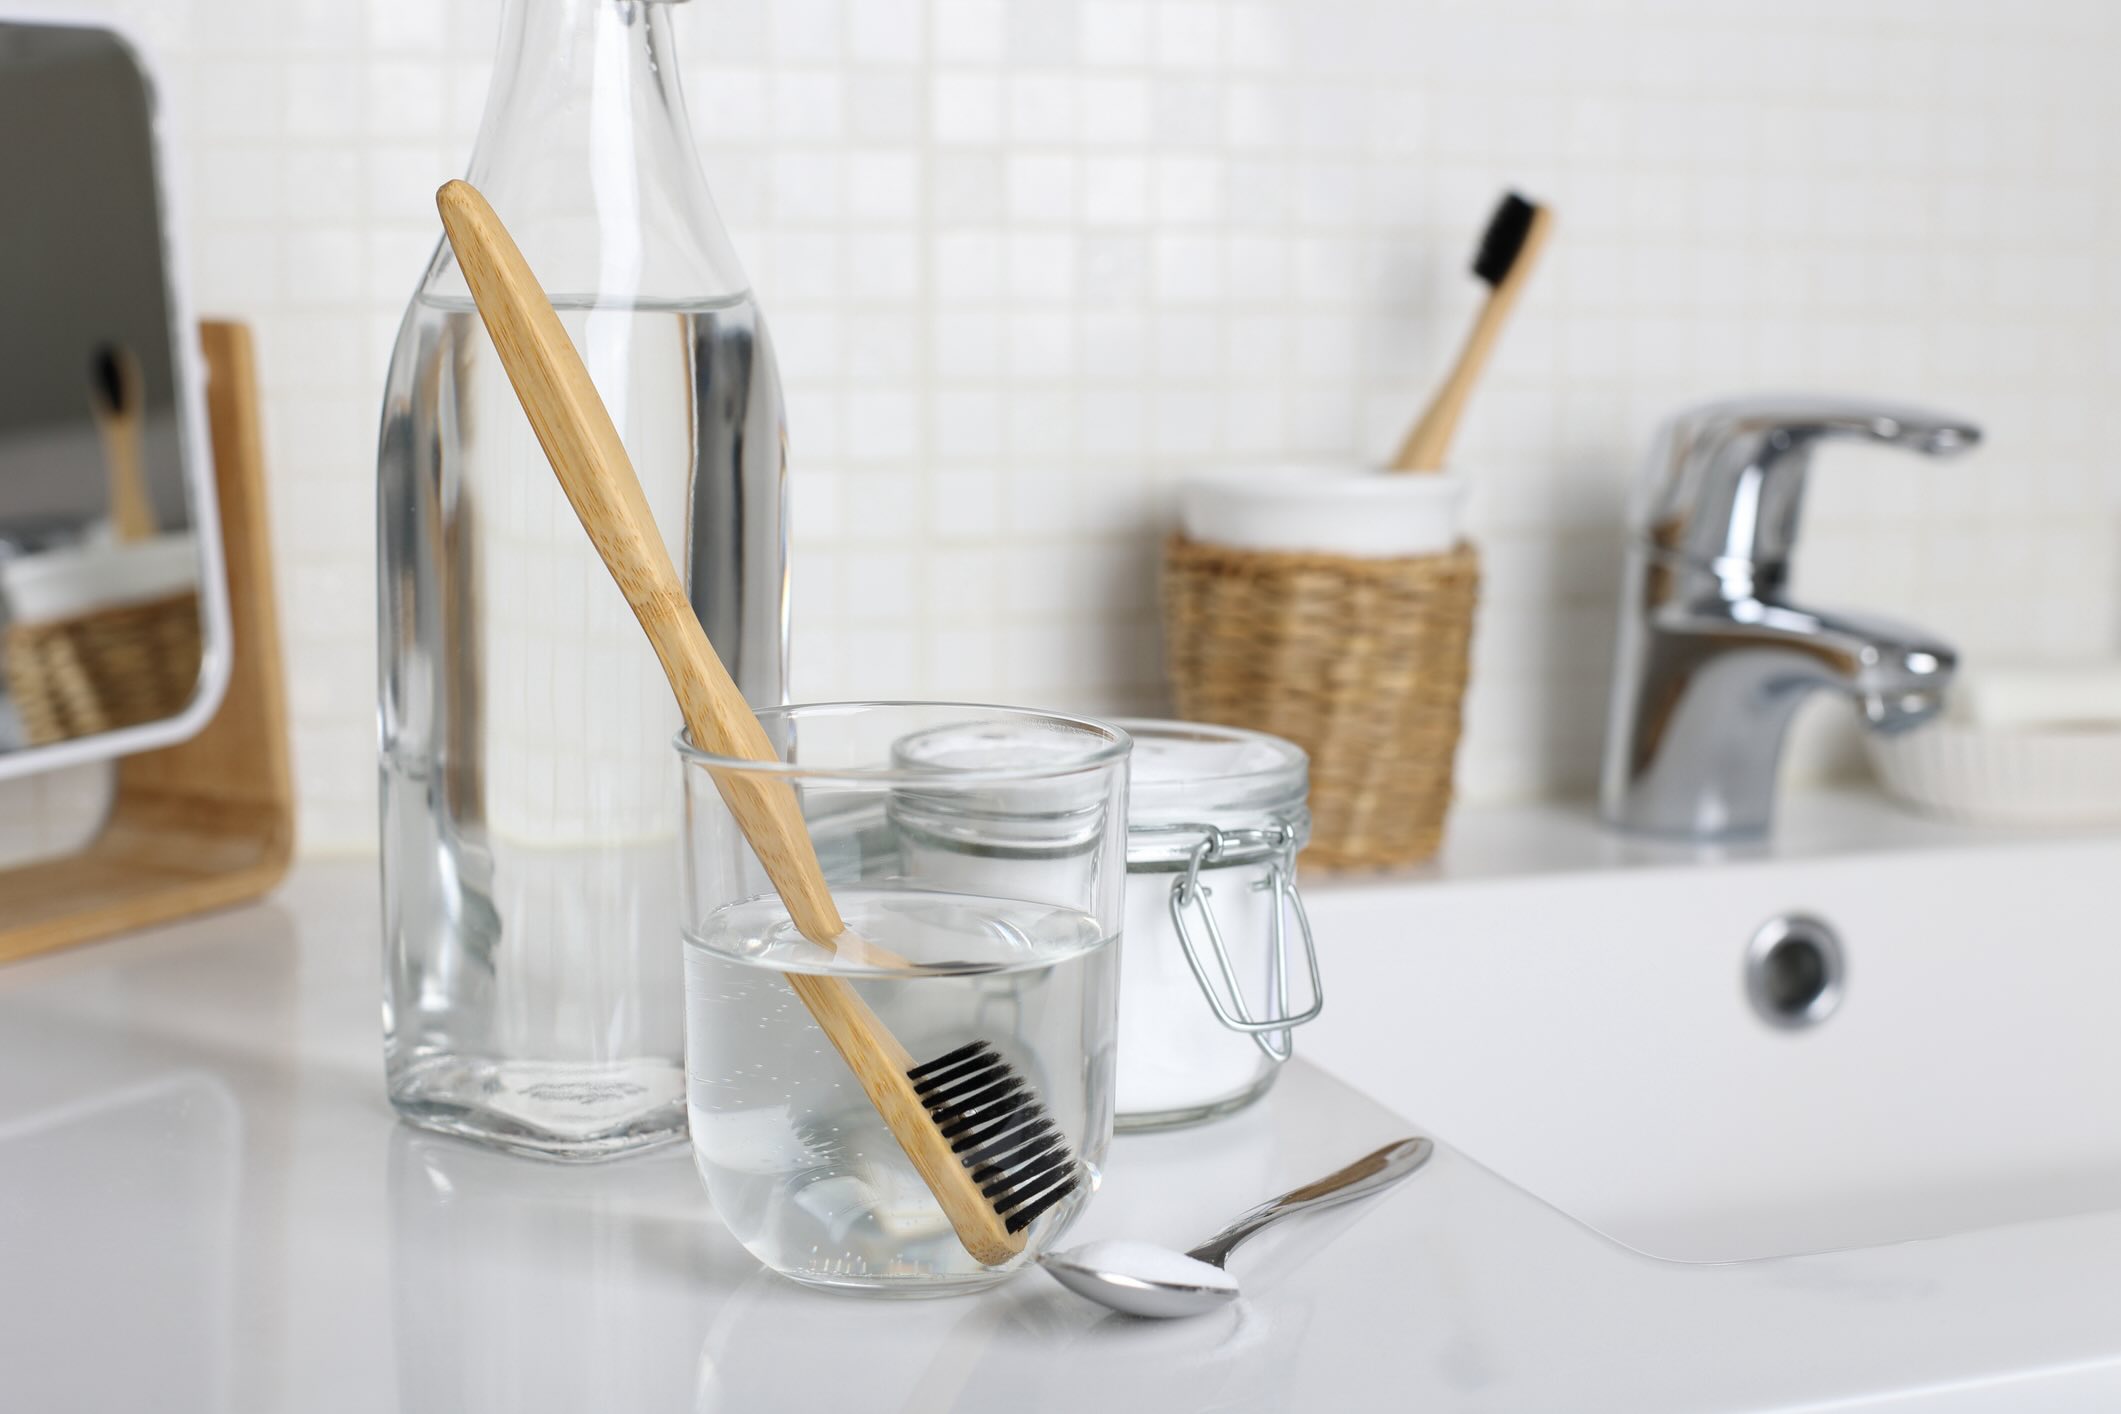 How Long To Boil A Toothbrush To Disinfect It